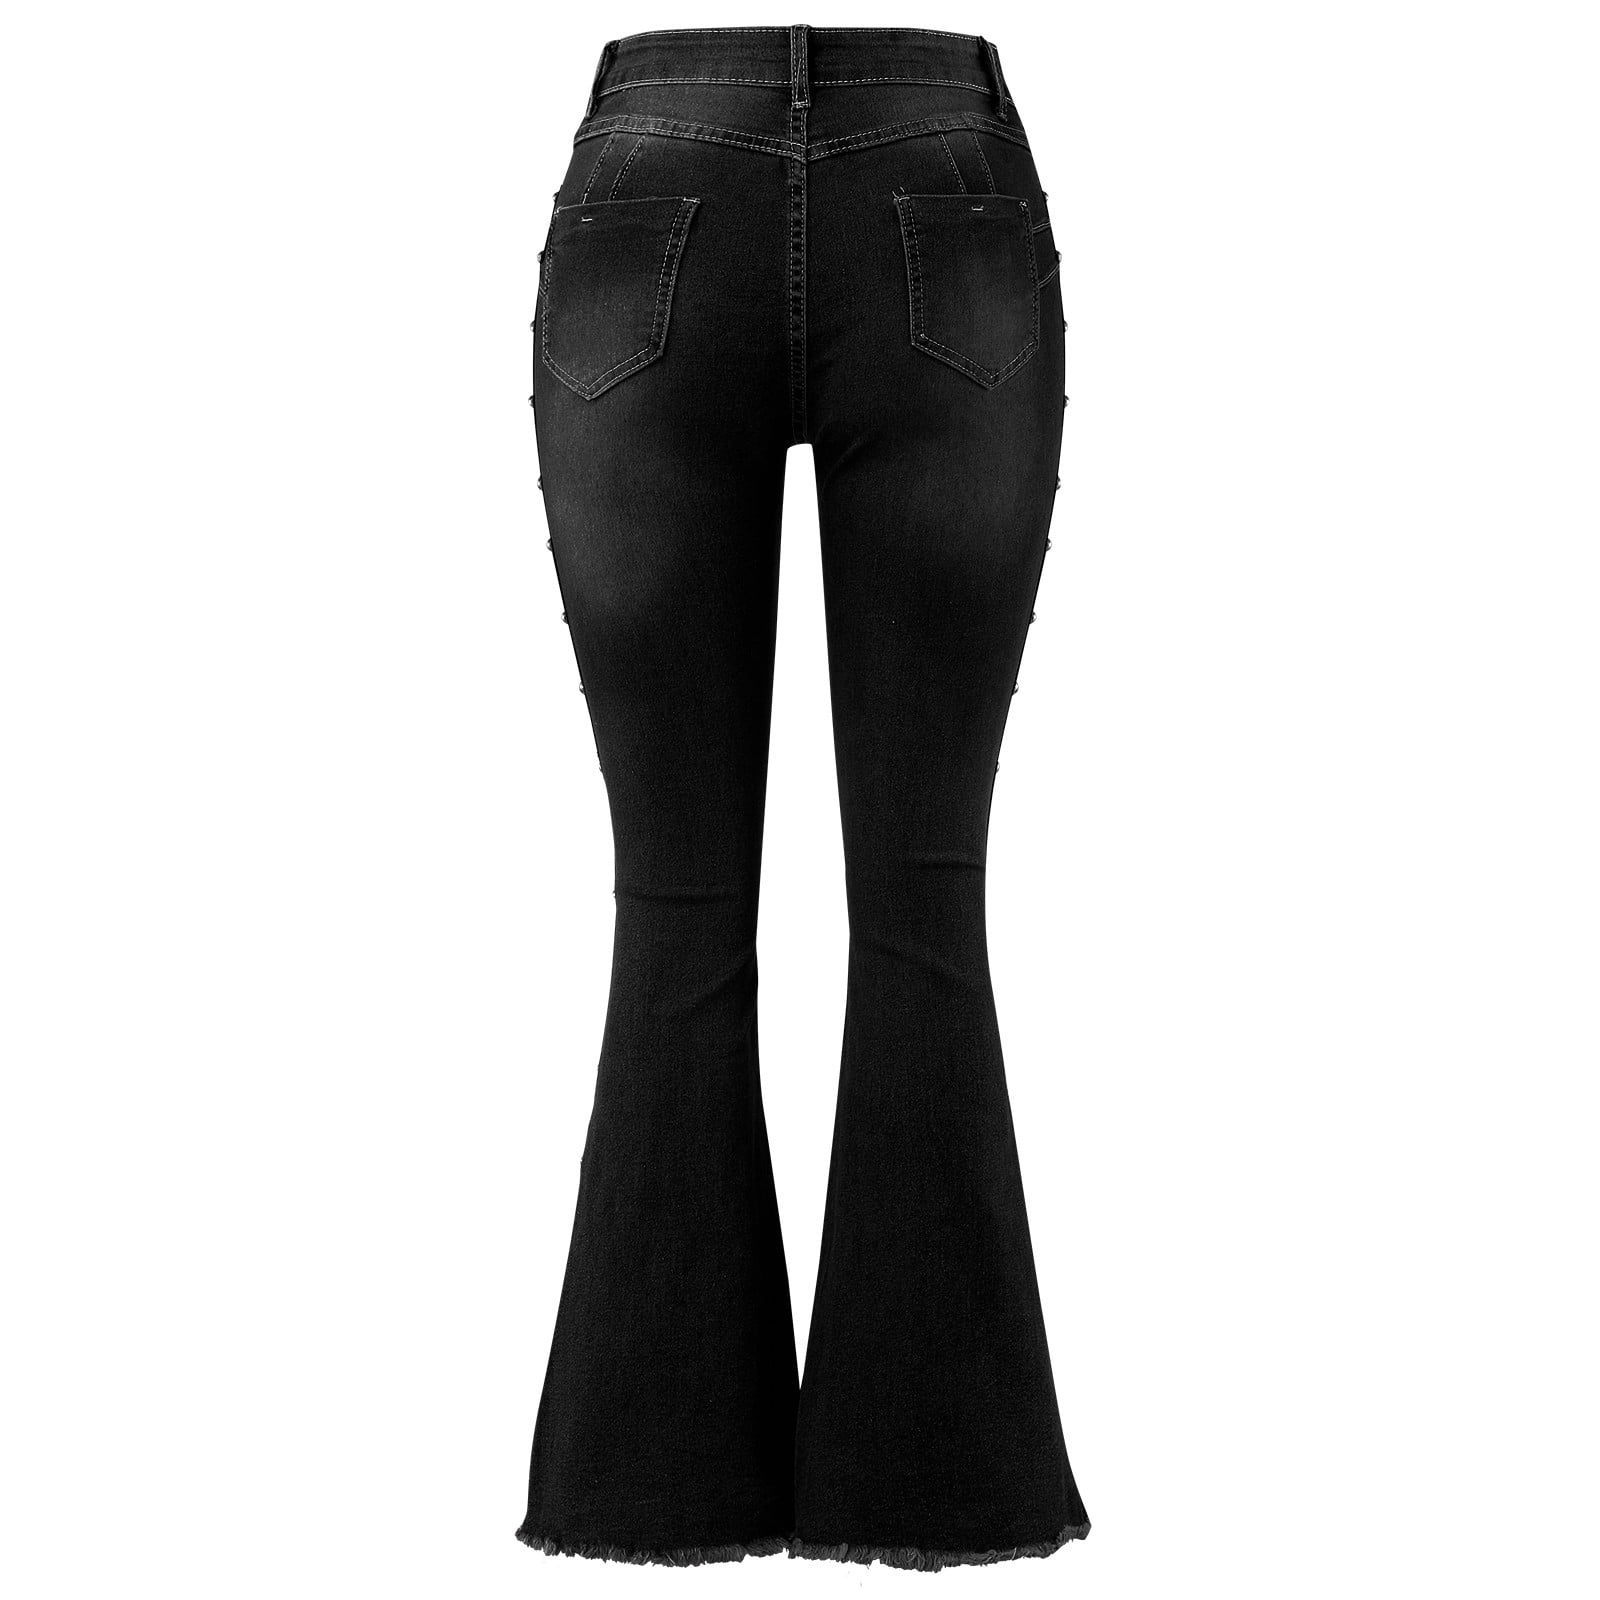 High Waisted Flared Trousers in Black Crepe Ready To Ship  Black school  trousers, High waisted flares, Flare trousers